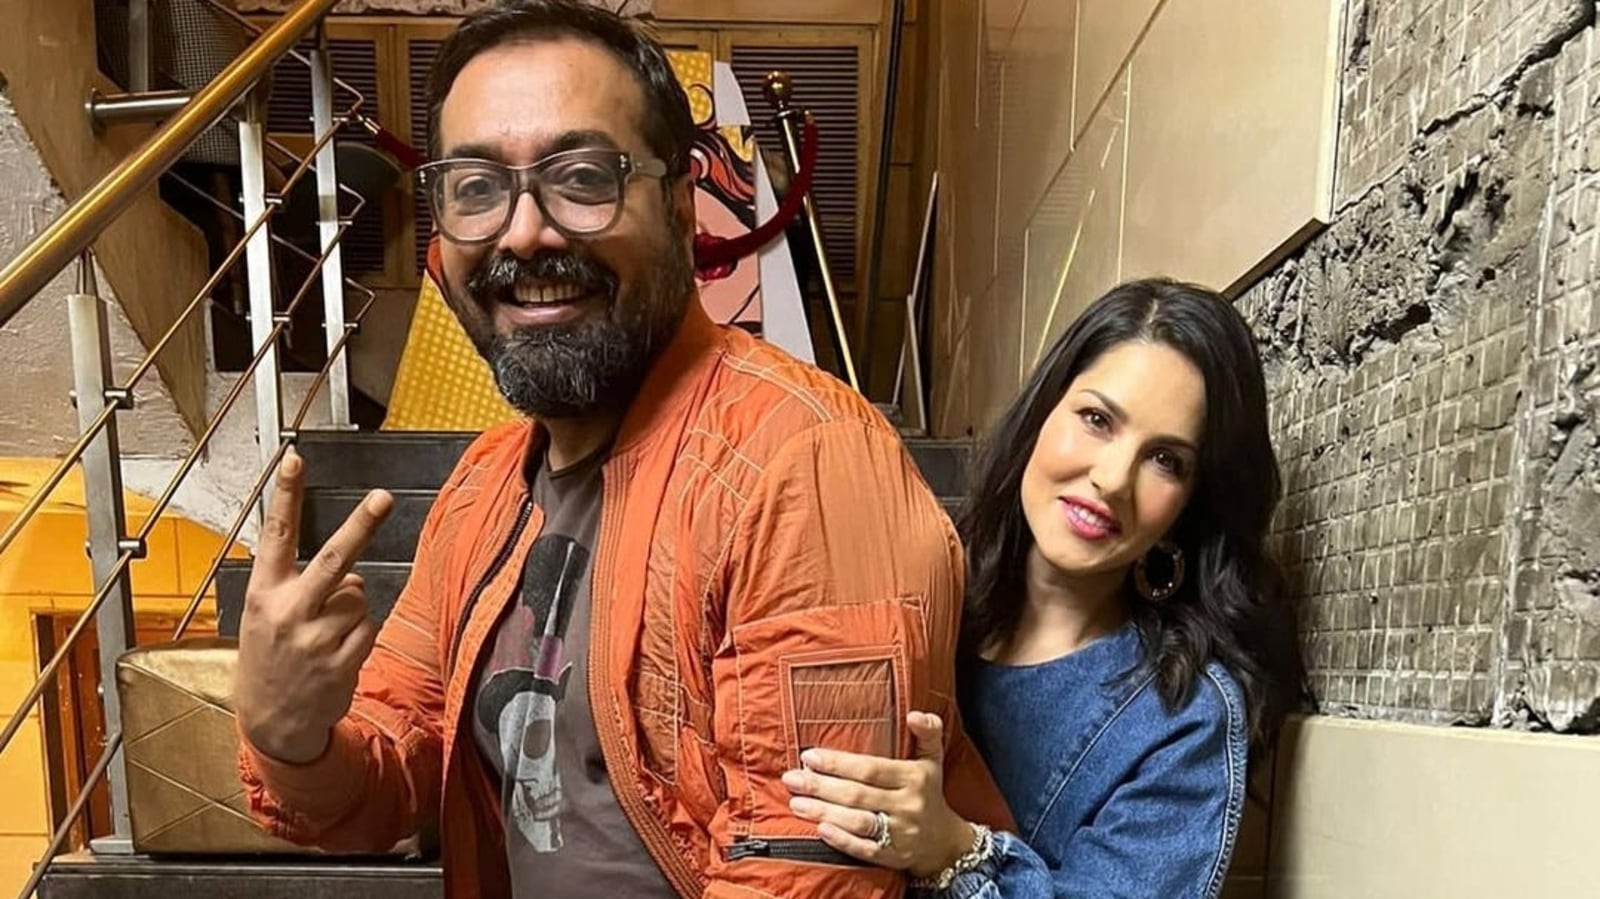 Sunny Leaon School Porn Video Hd - Sunny Leone smiles 'ear to ear' as Anurag Kashyap signs her for his next  film | Bollywood - Hindustan Times